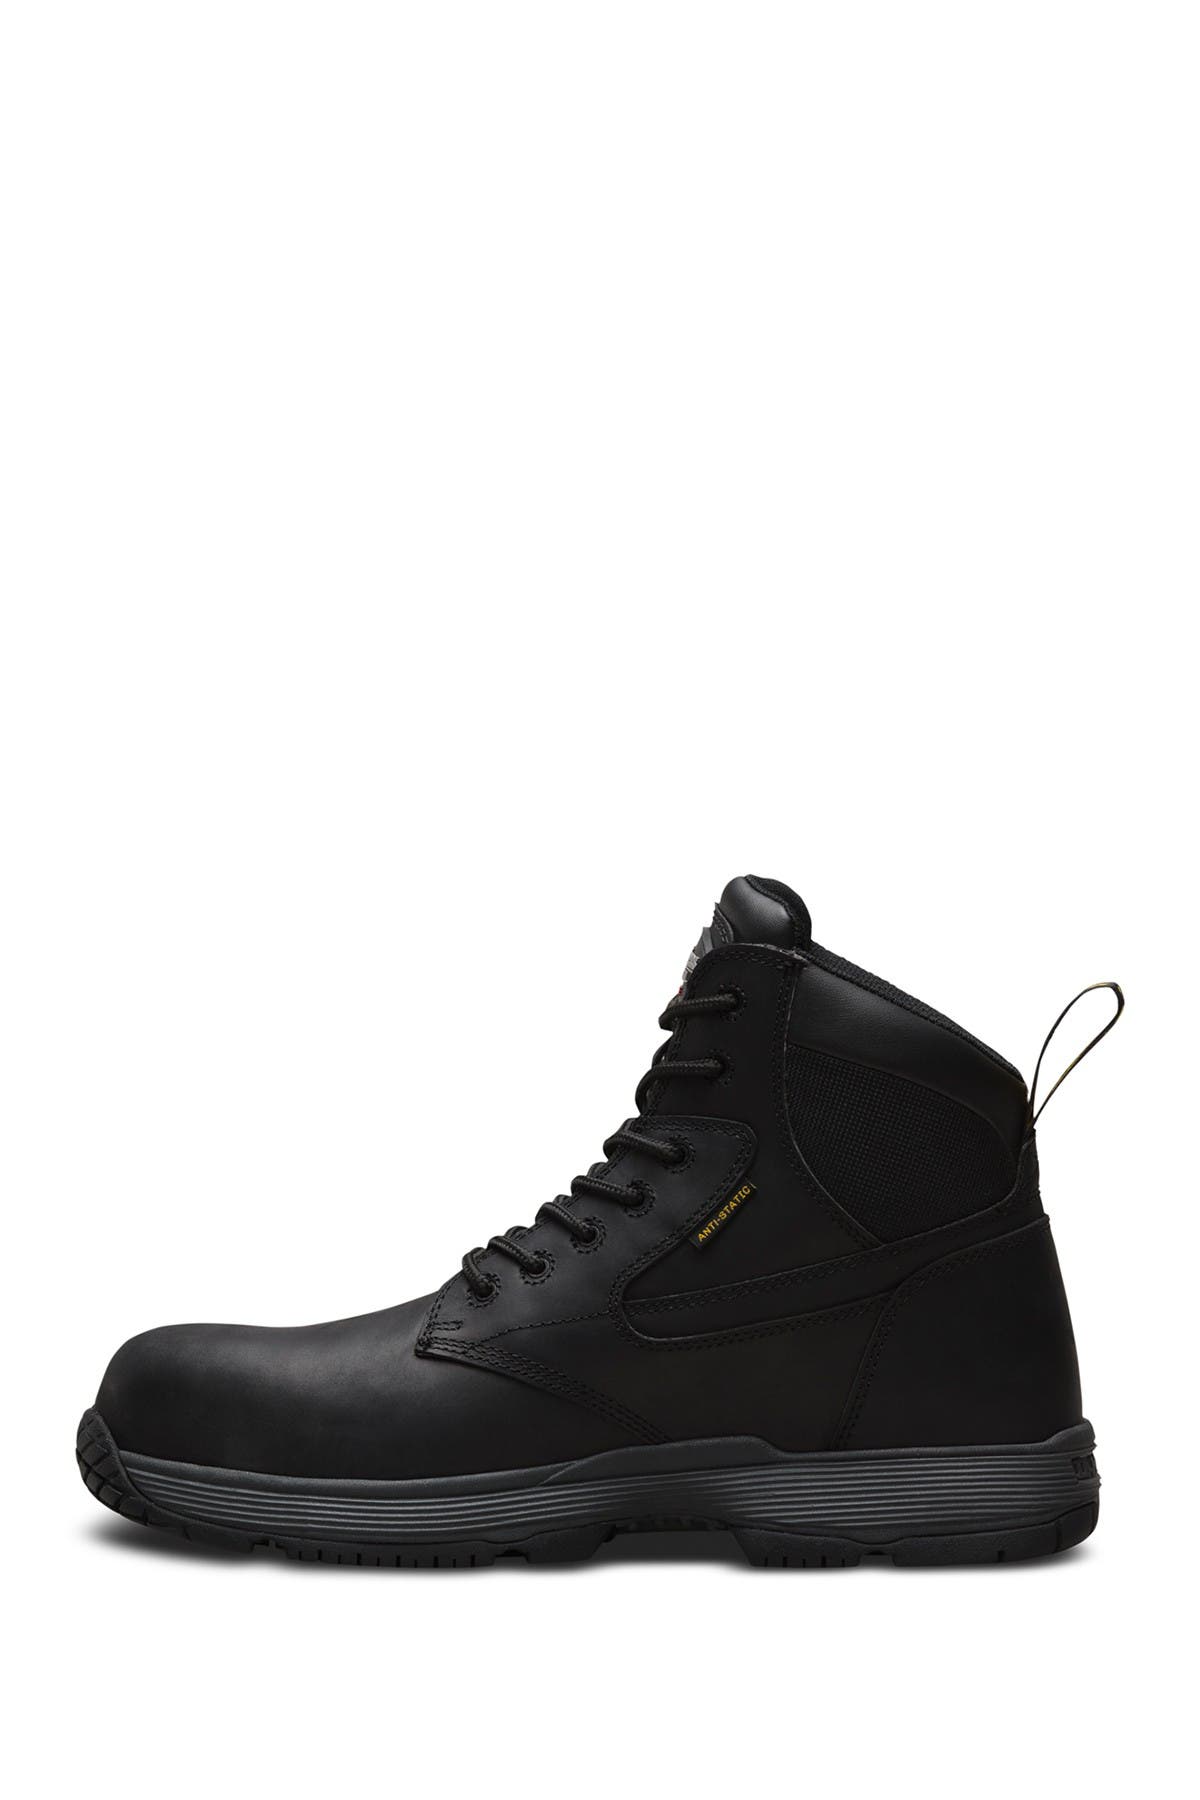 dr martens corvid safety boots